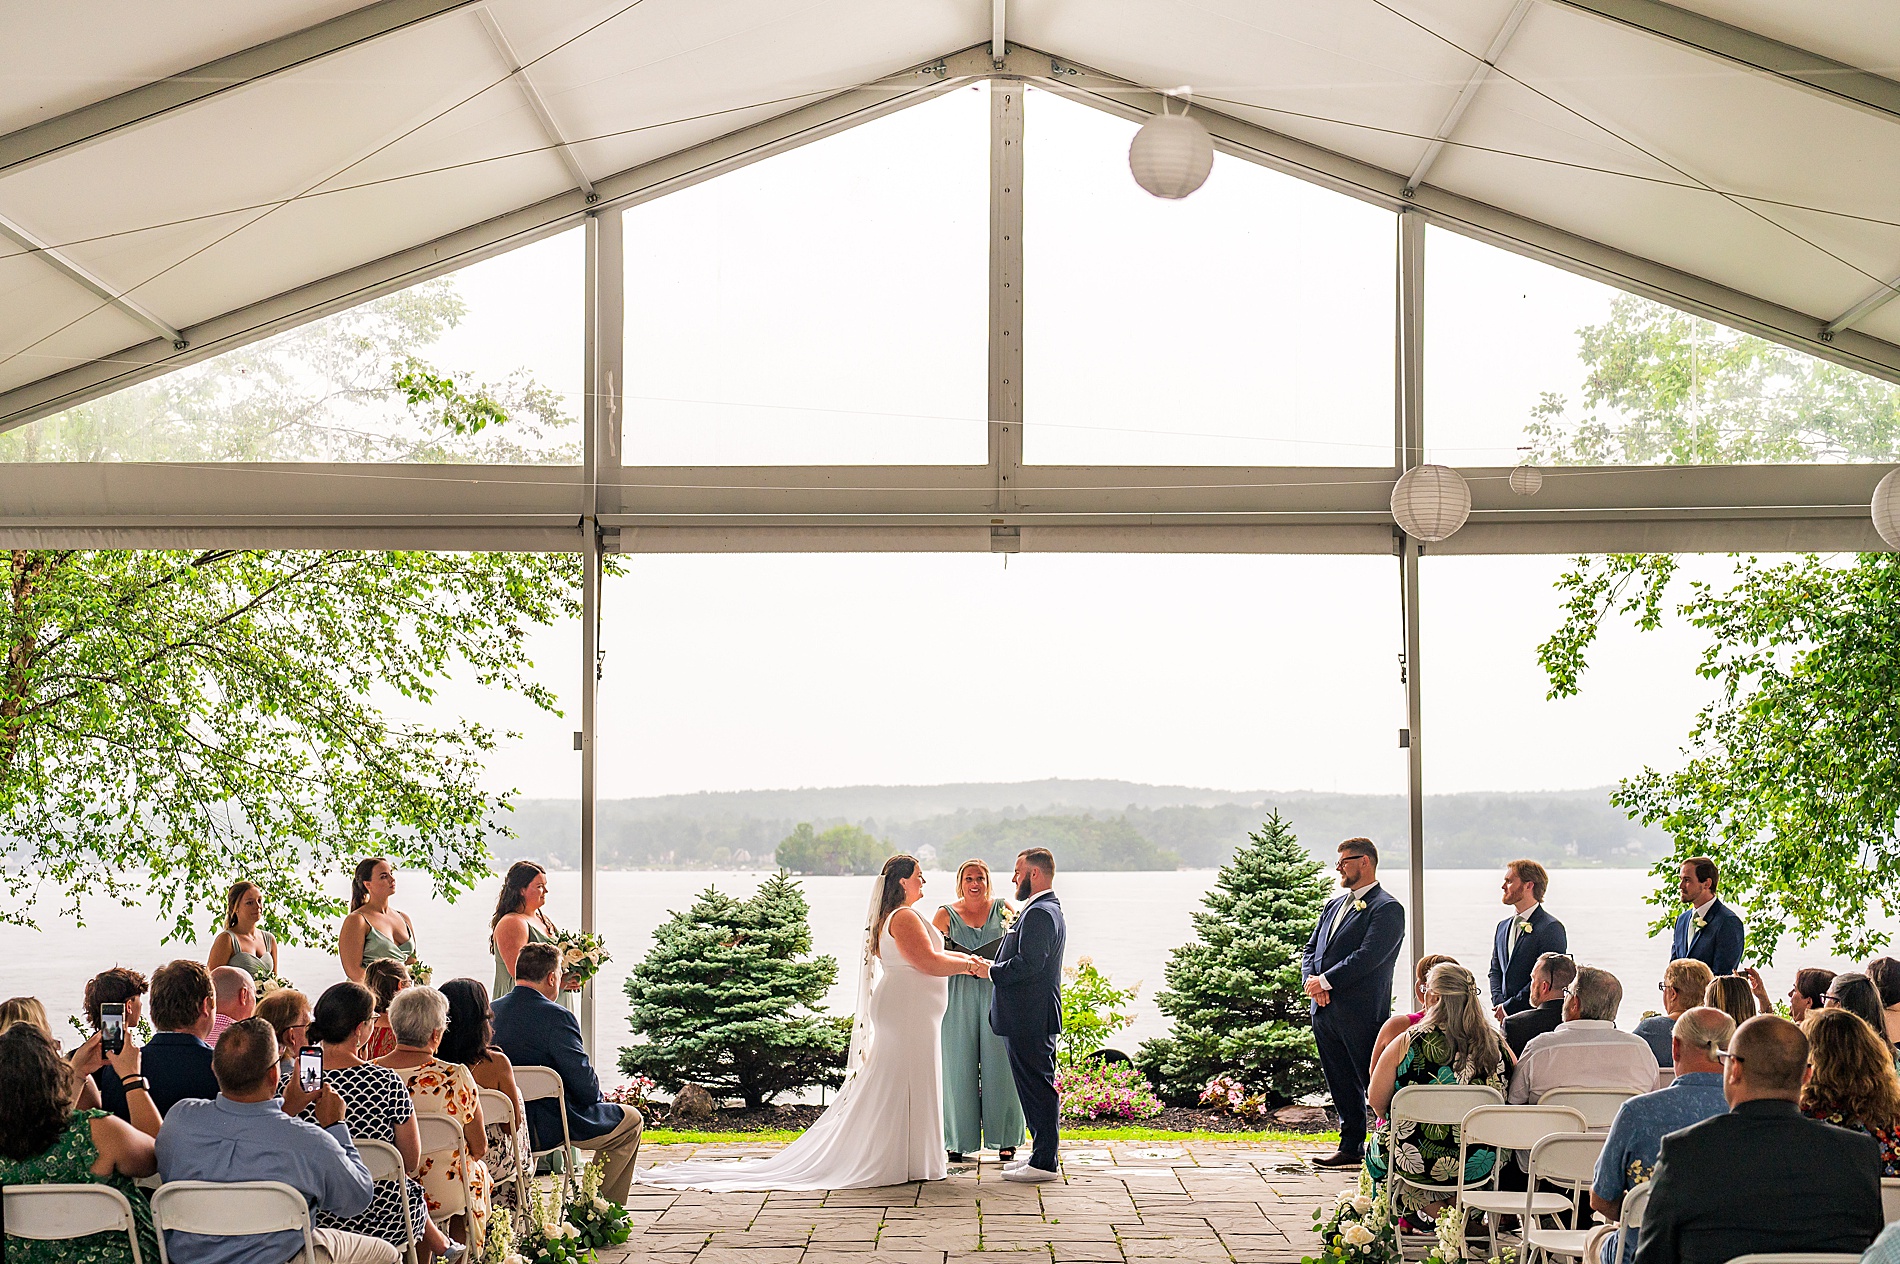 Wedding ceremony inside the pavilion at The Margate